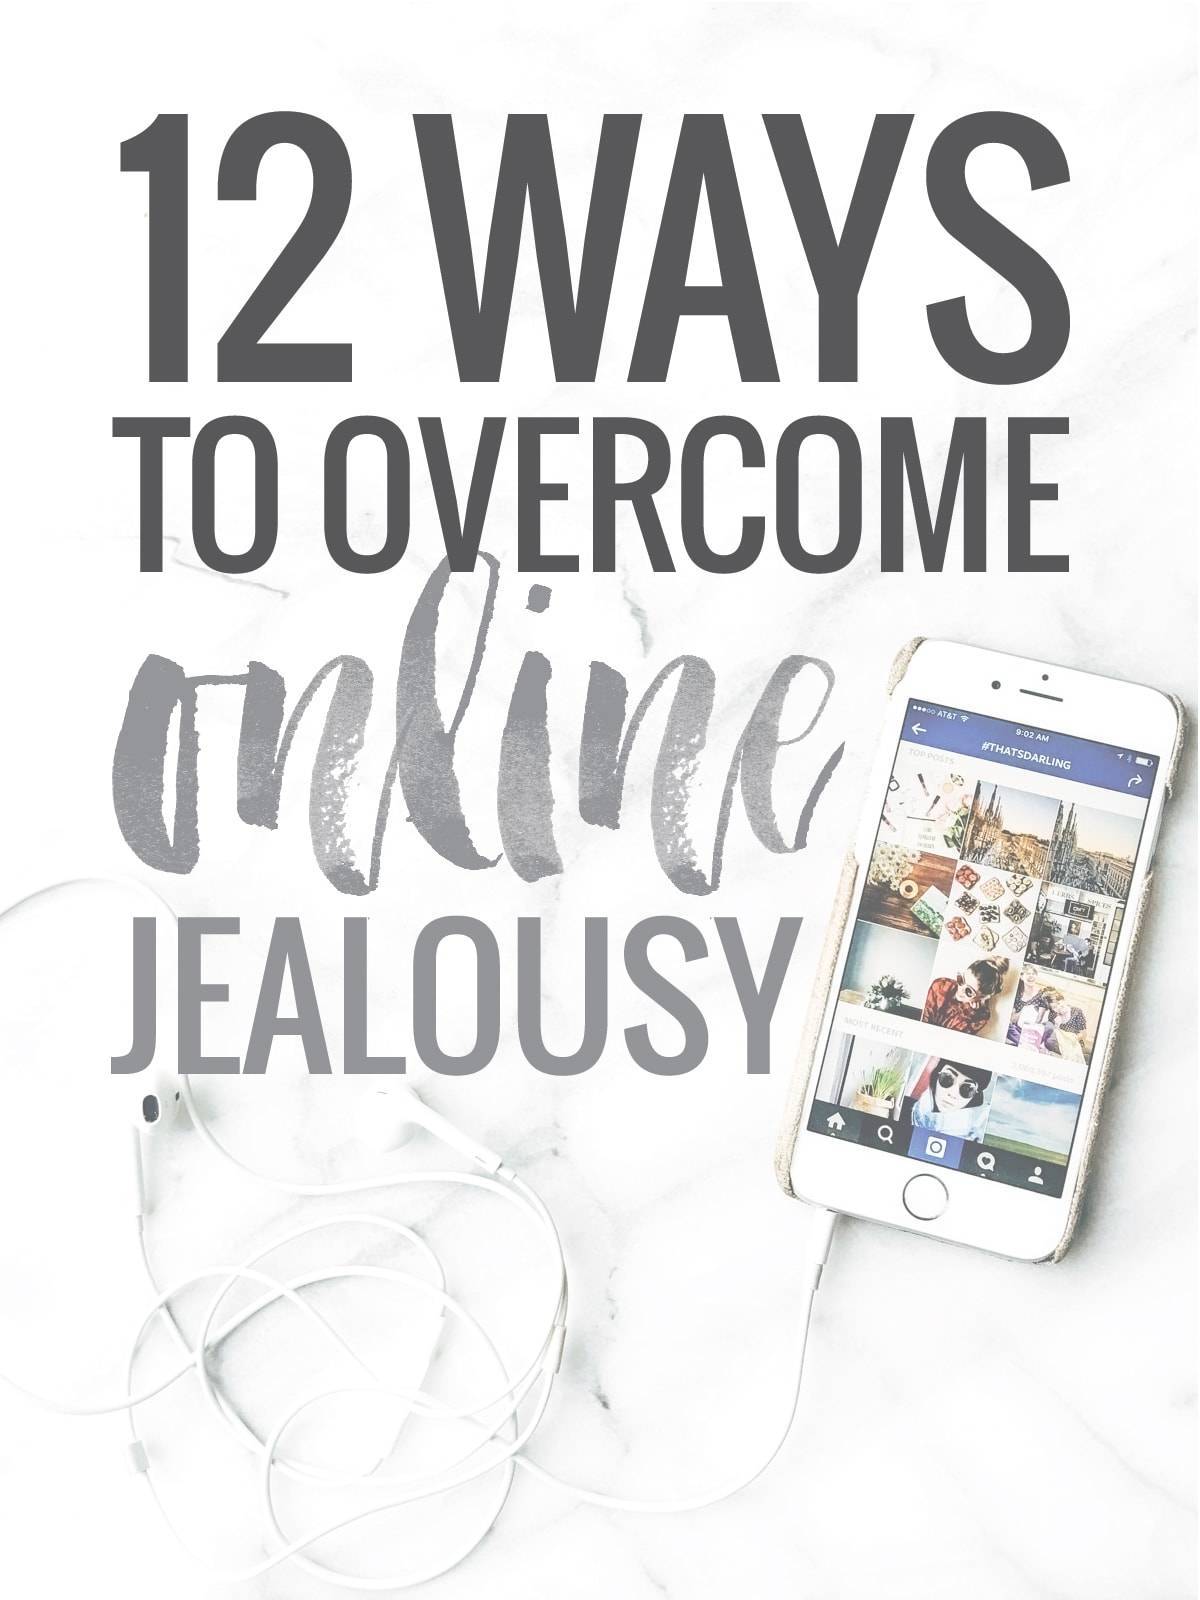 Feeling Jealous on the Internet… and 12 Ways to Make it Stop